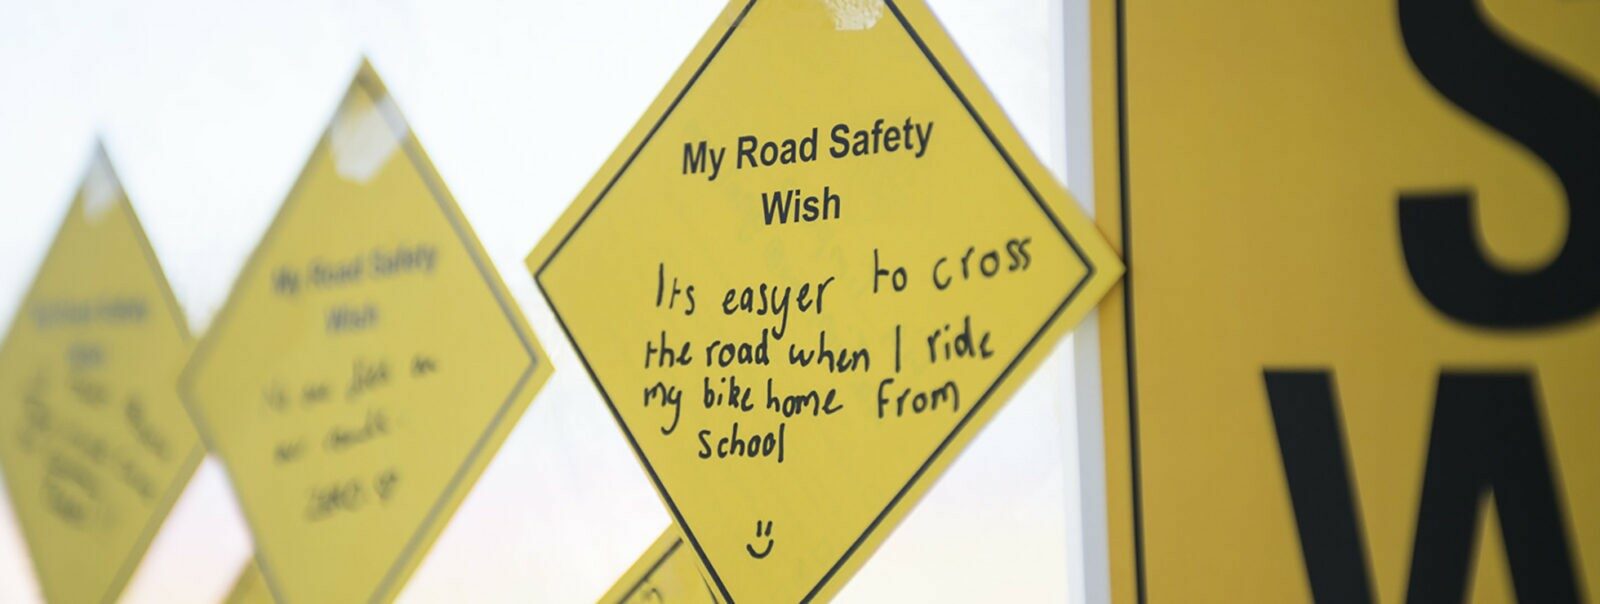 My road safety wish Submissions